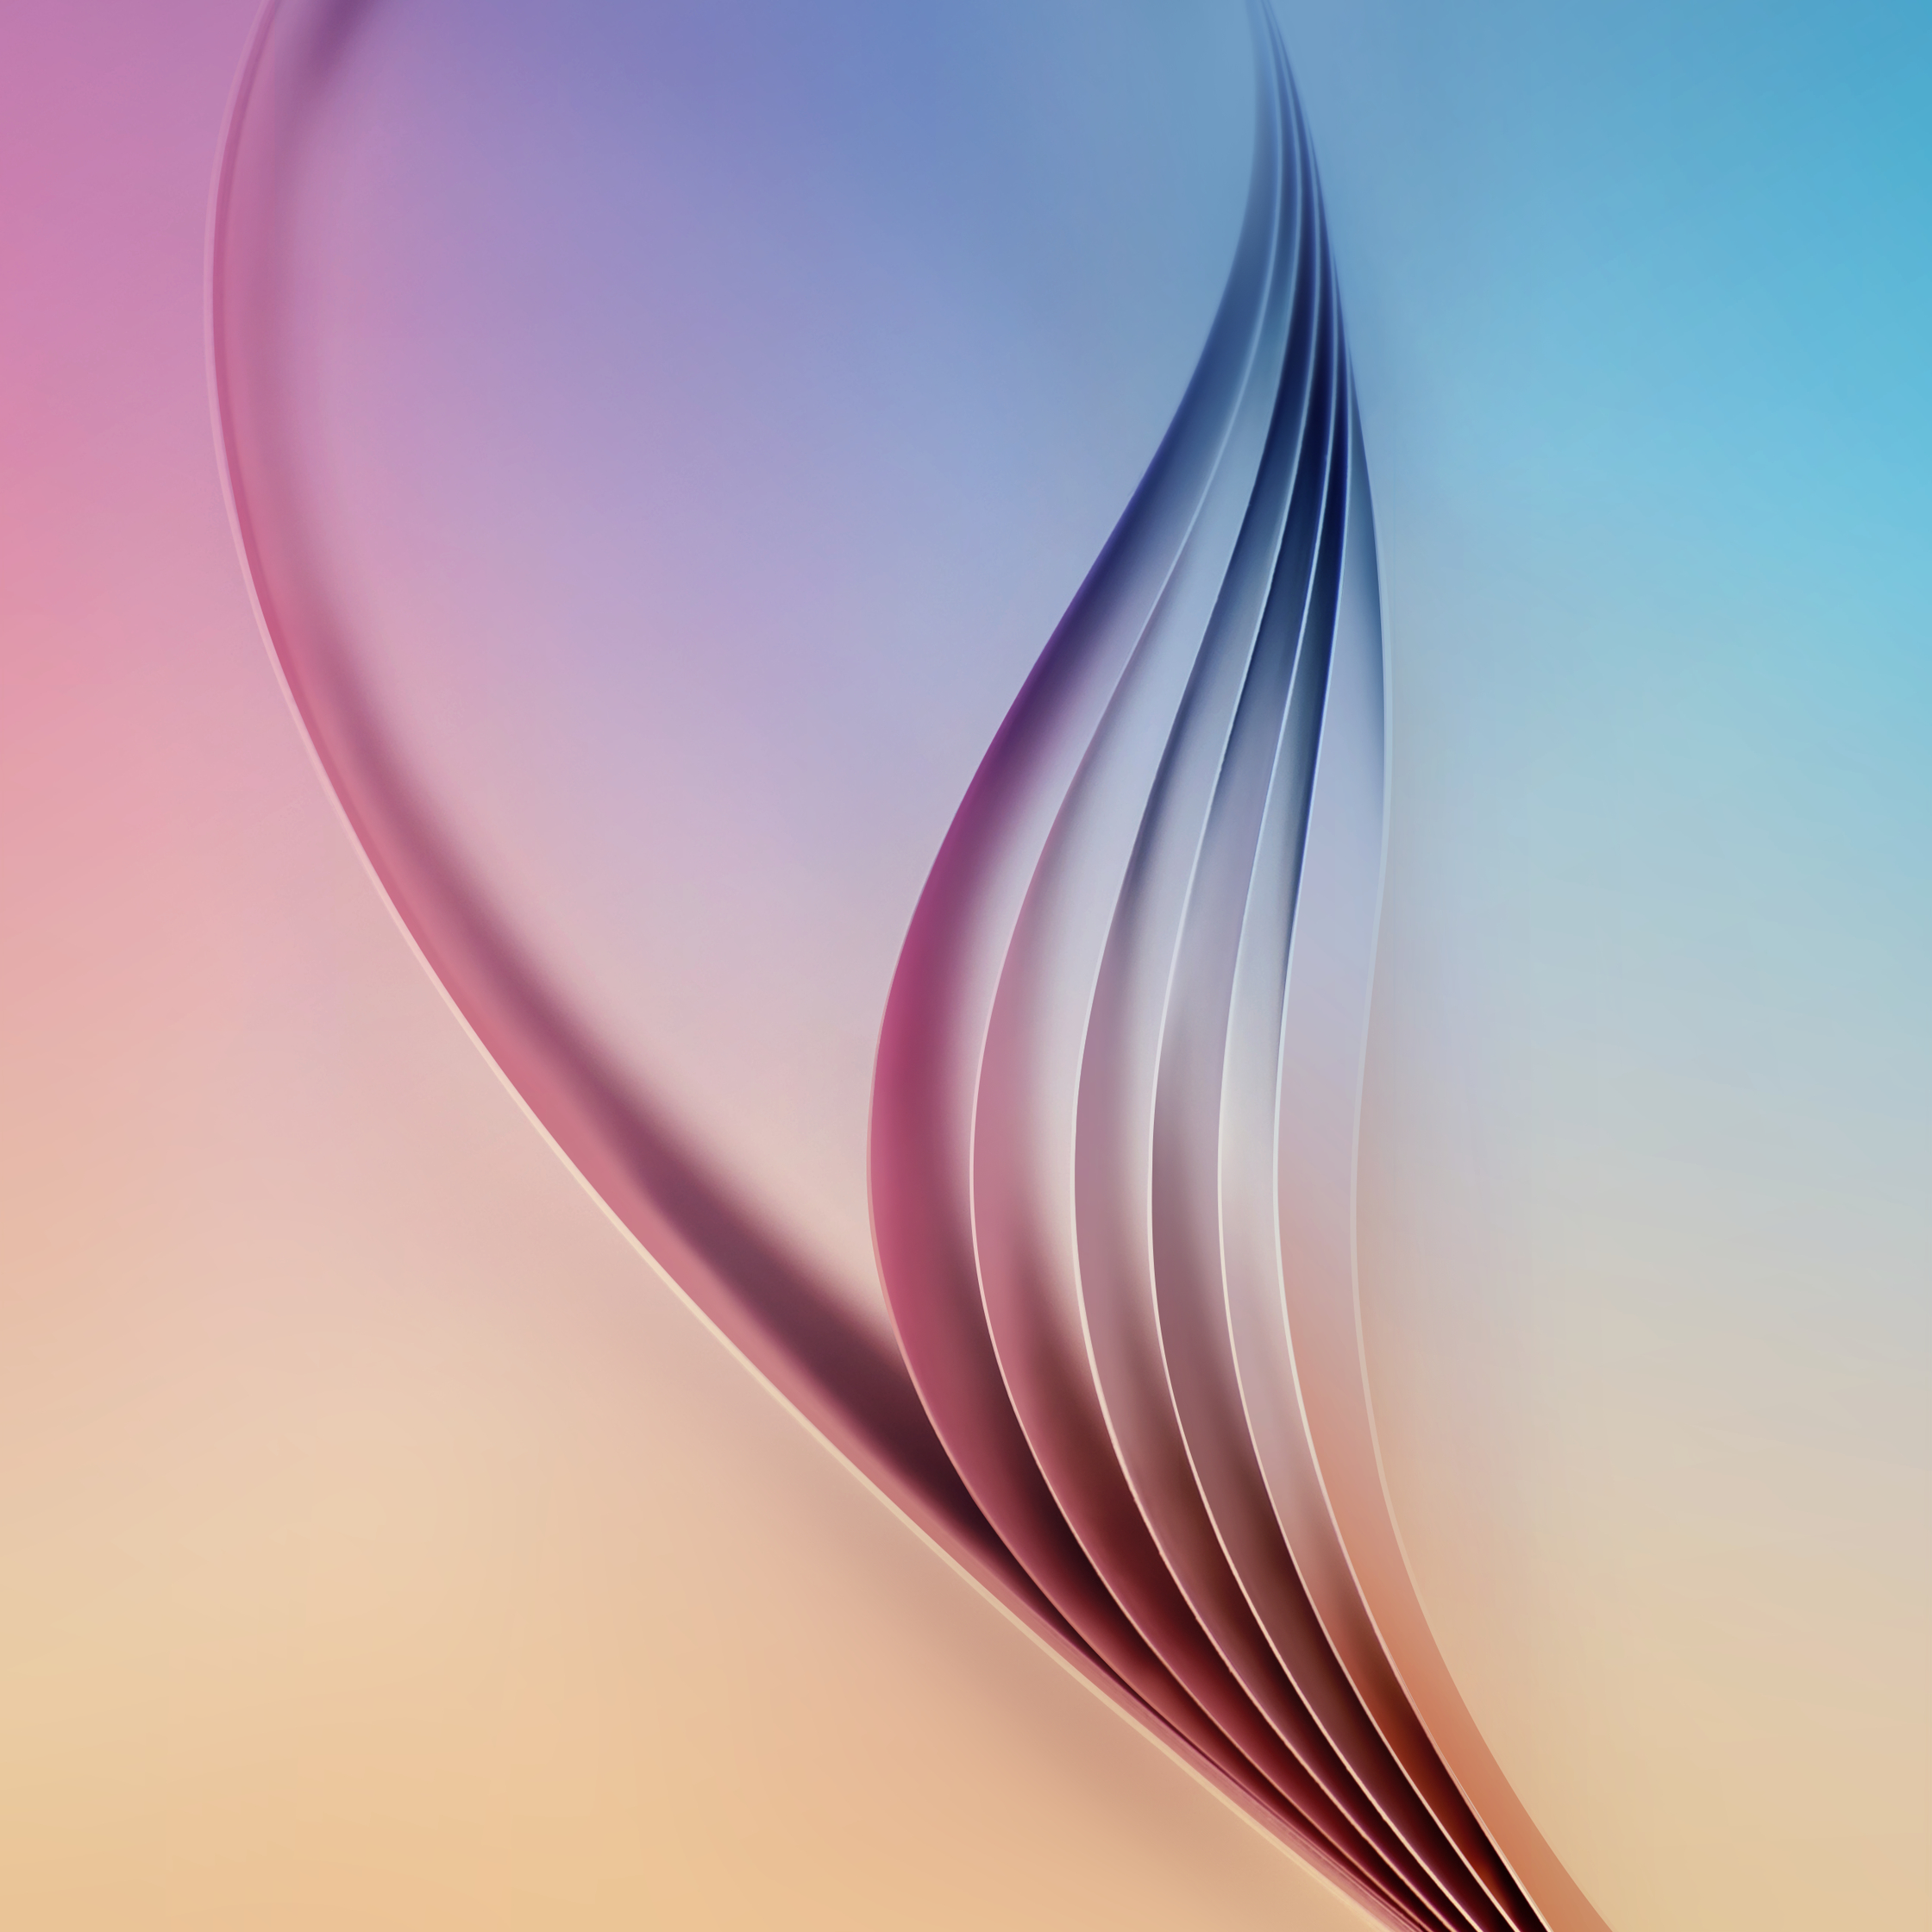 Samsung Galaxy S6 And Edge Wallpaper Show Up Them Here